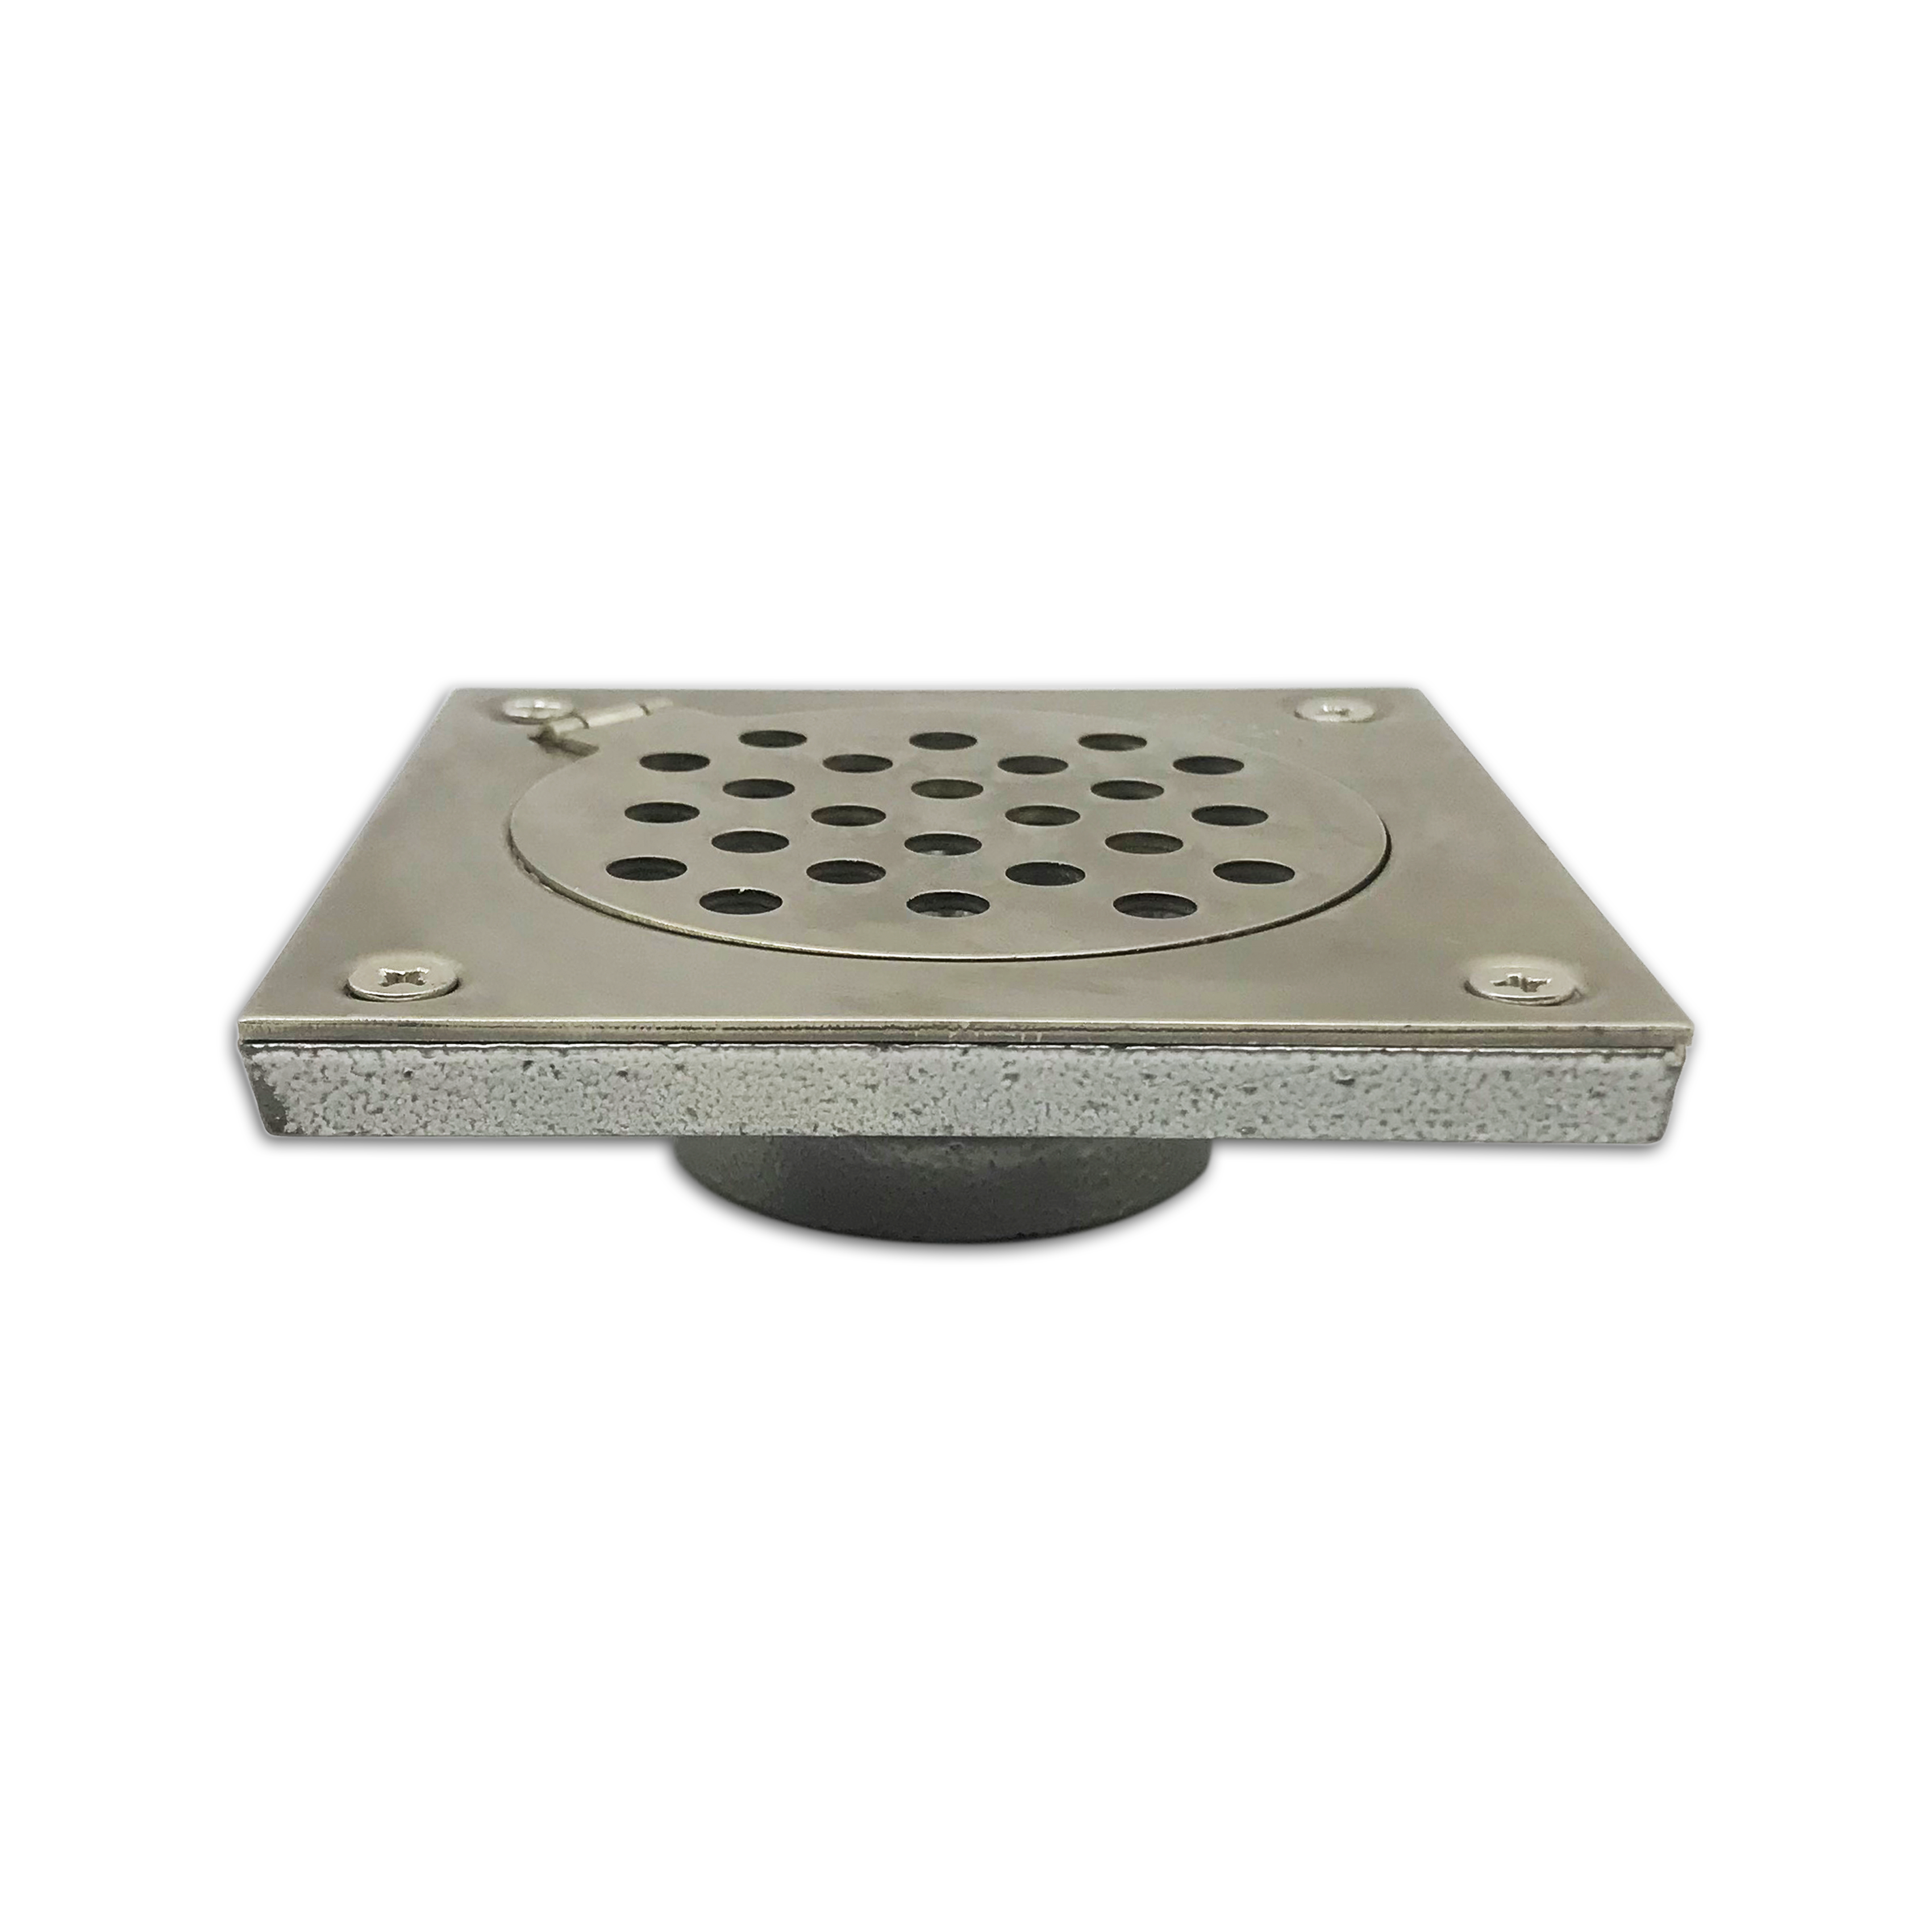 Can I Install a Square Bathroom Drain Cover Over a Round Drain?